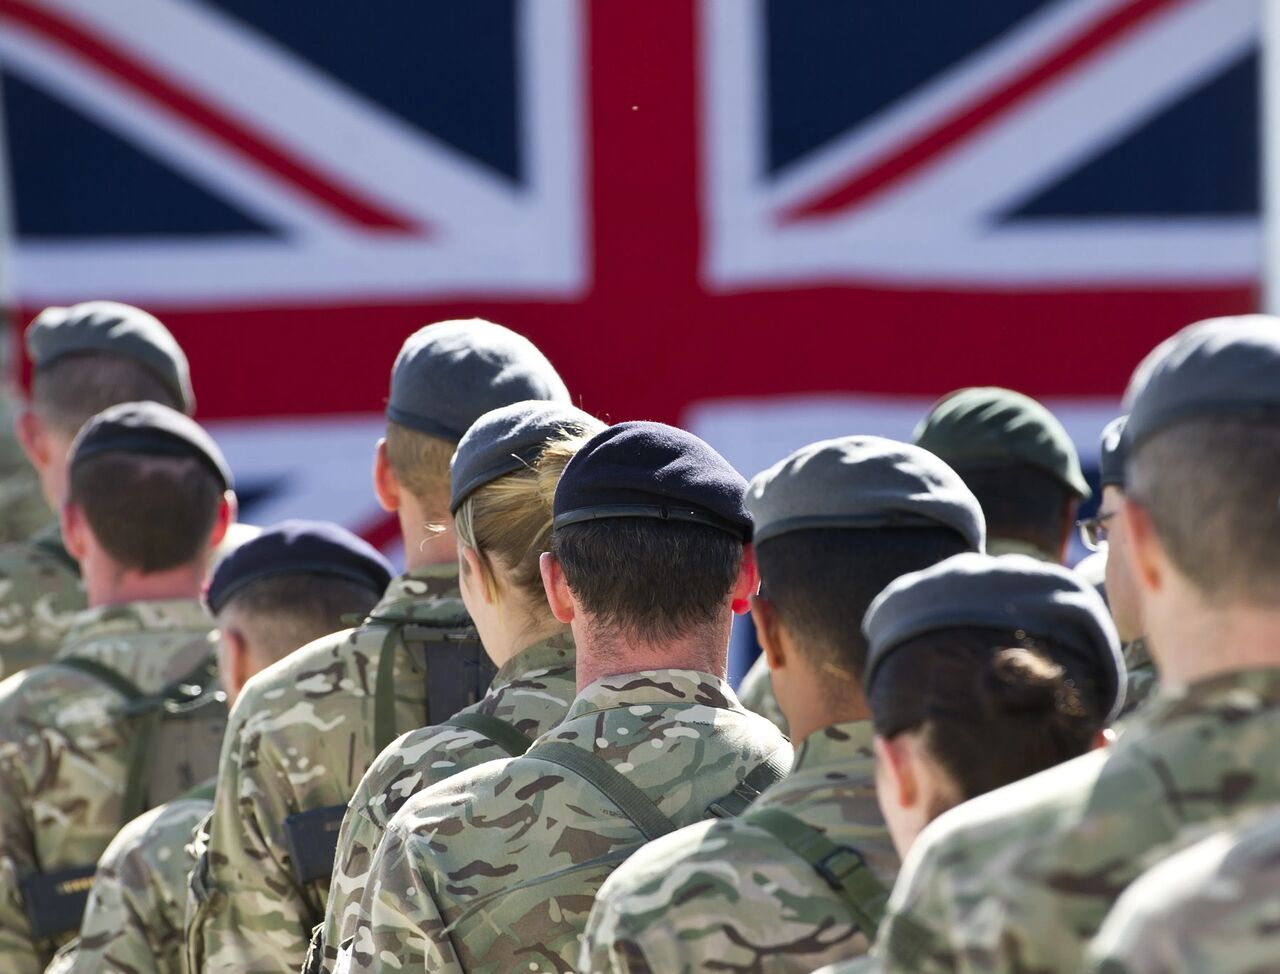 Ex-UK defense officials: Army must 'prepare for war'